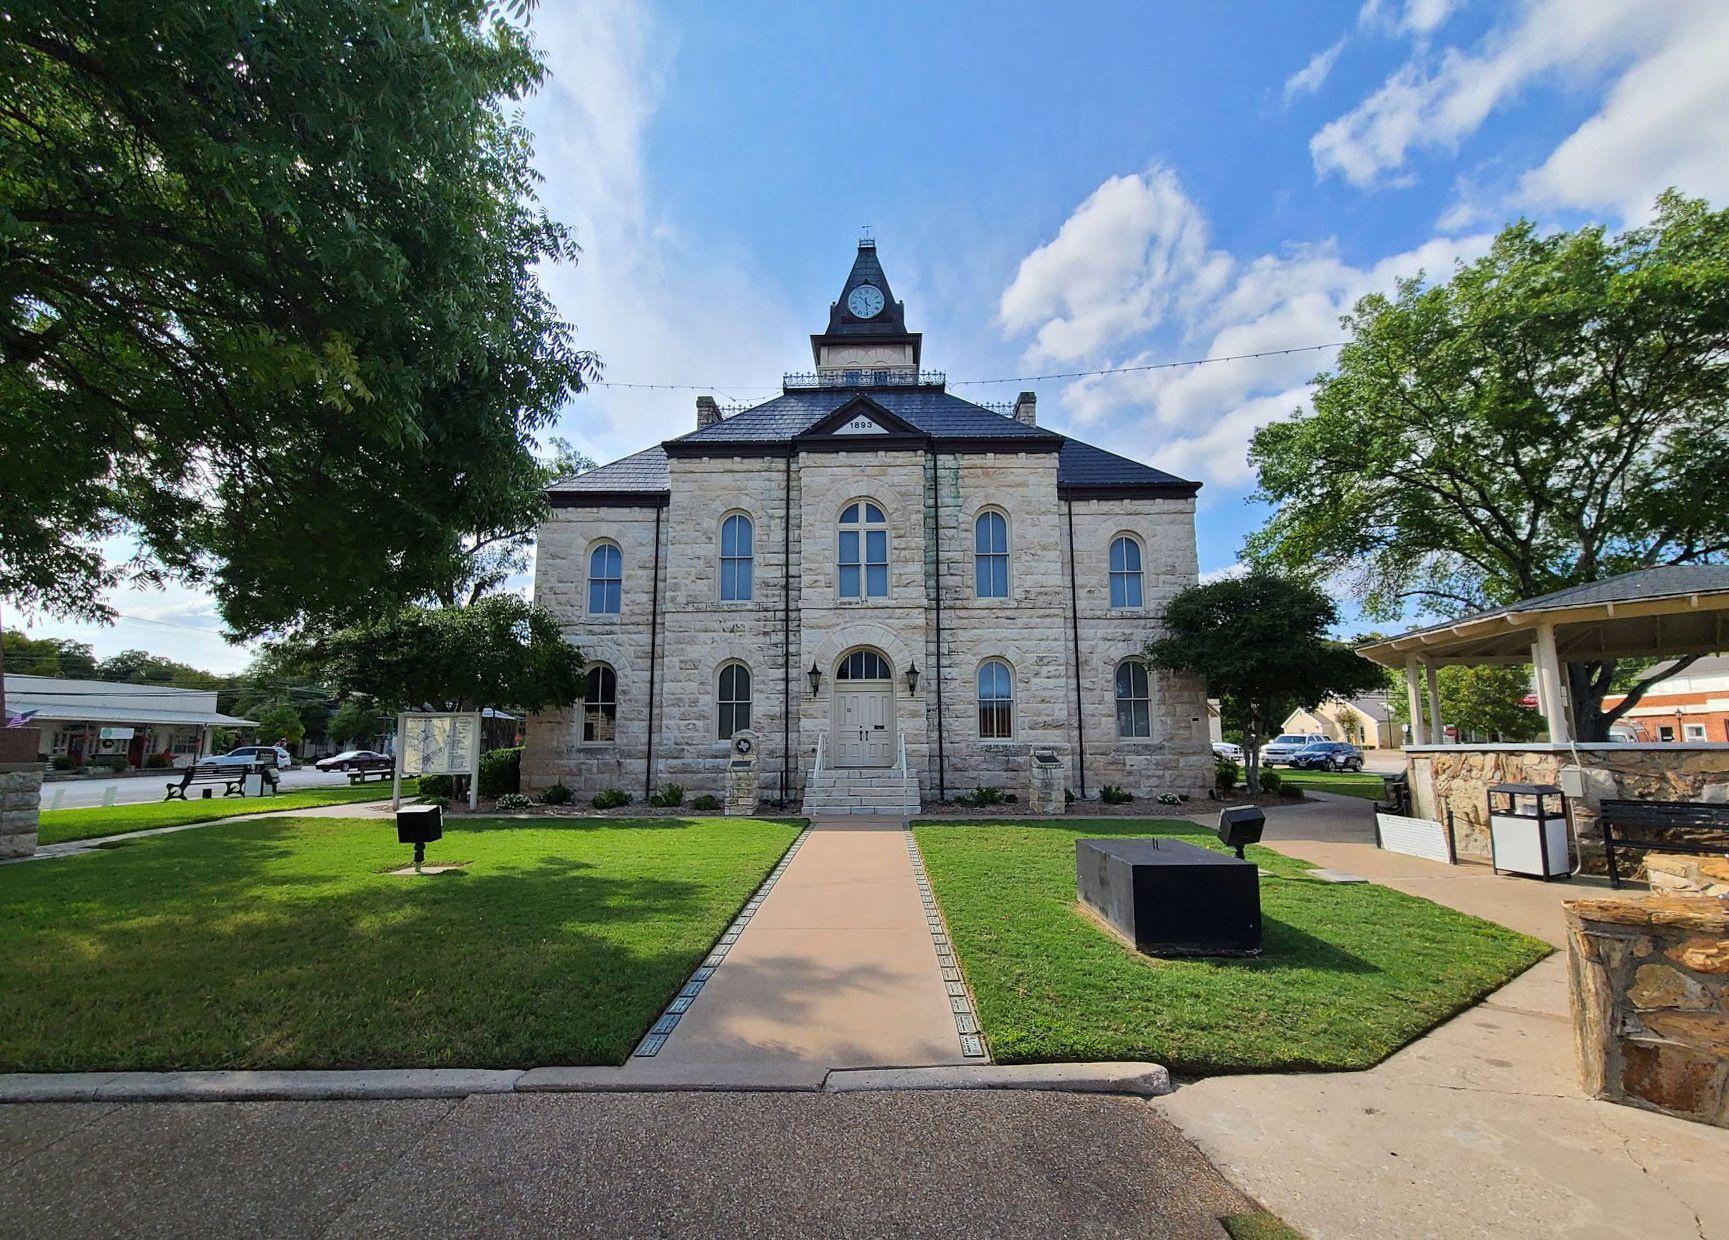 The courthouse at the center of Glen Rose, Texas.